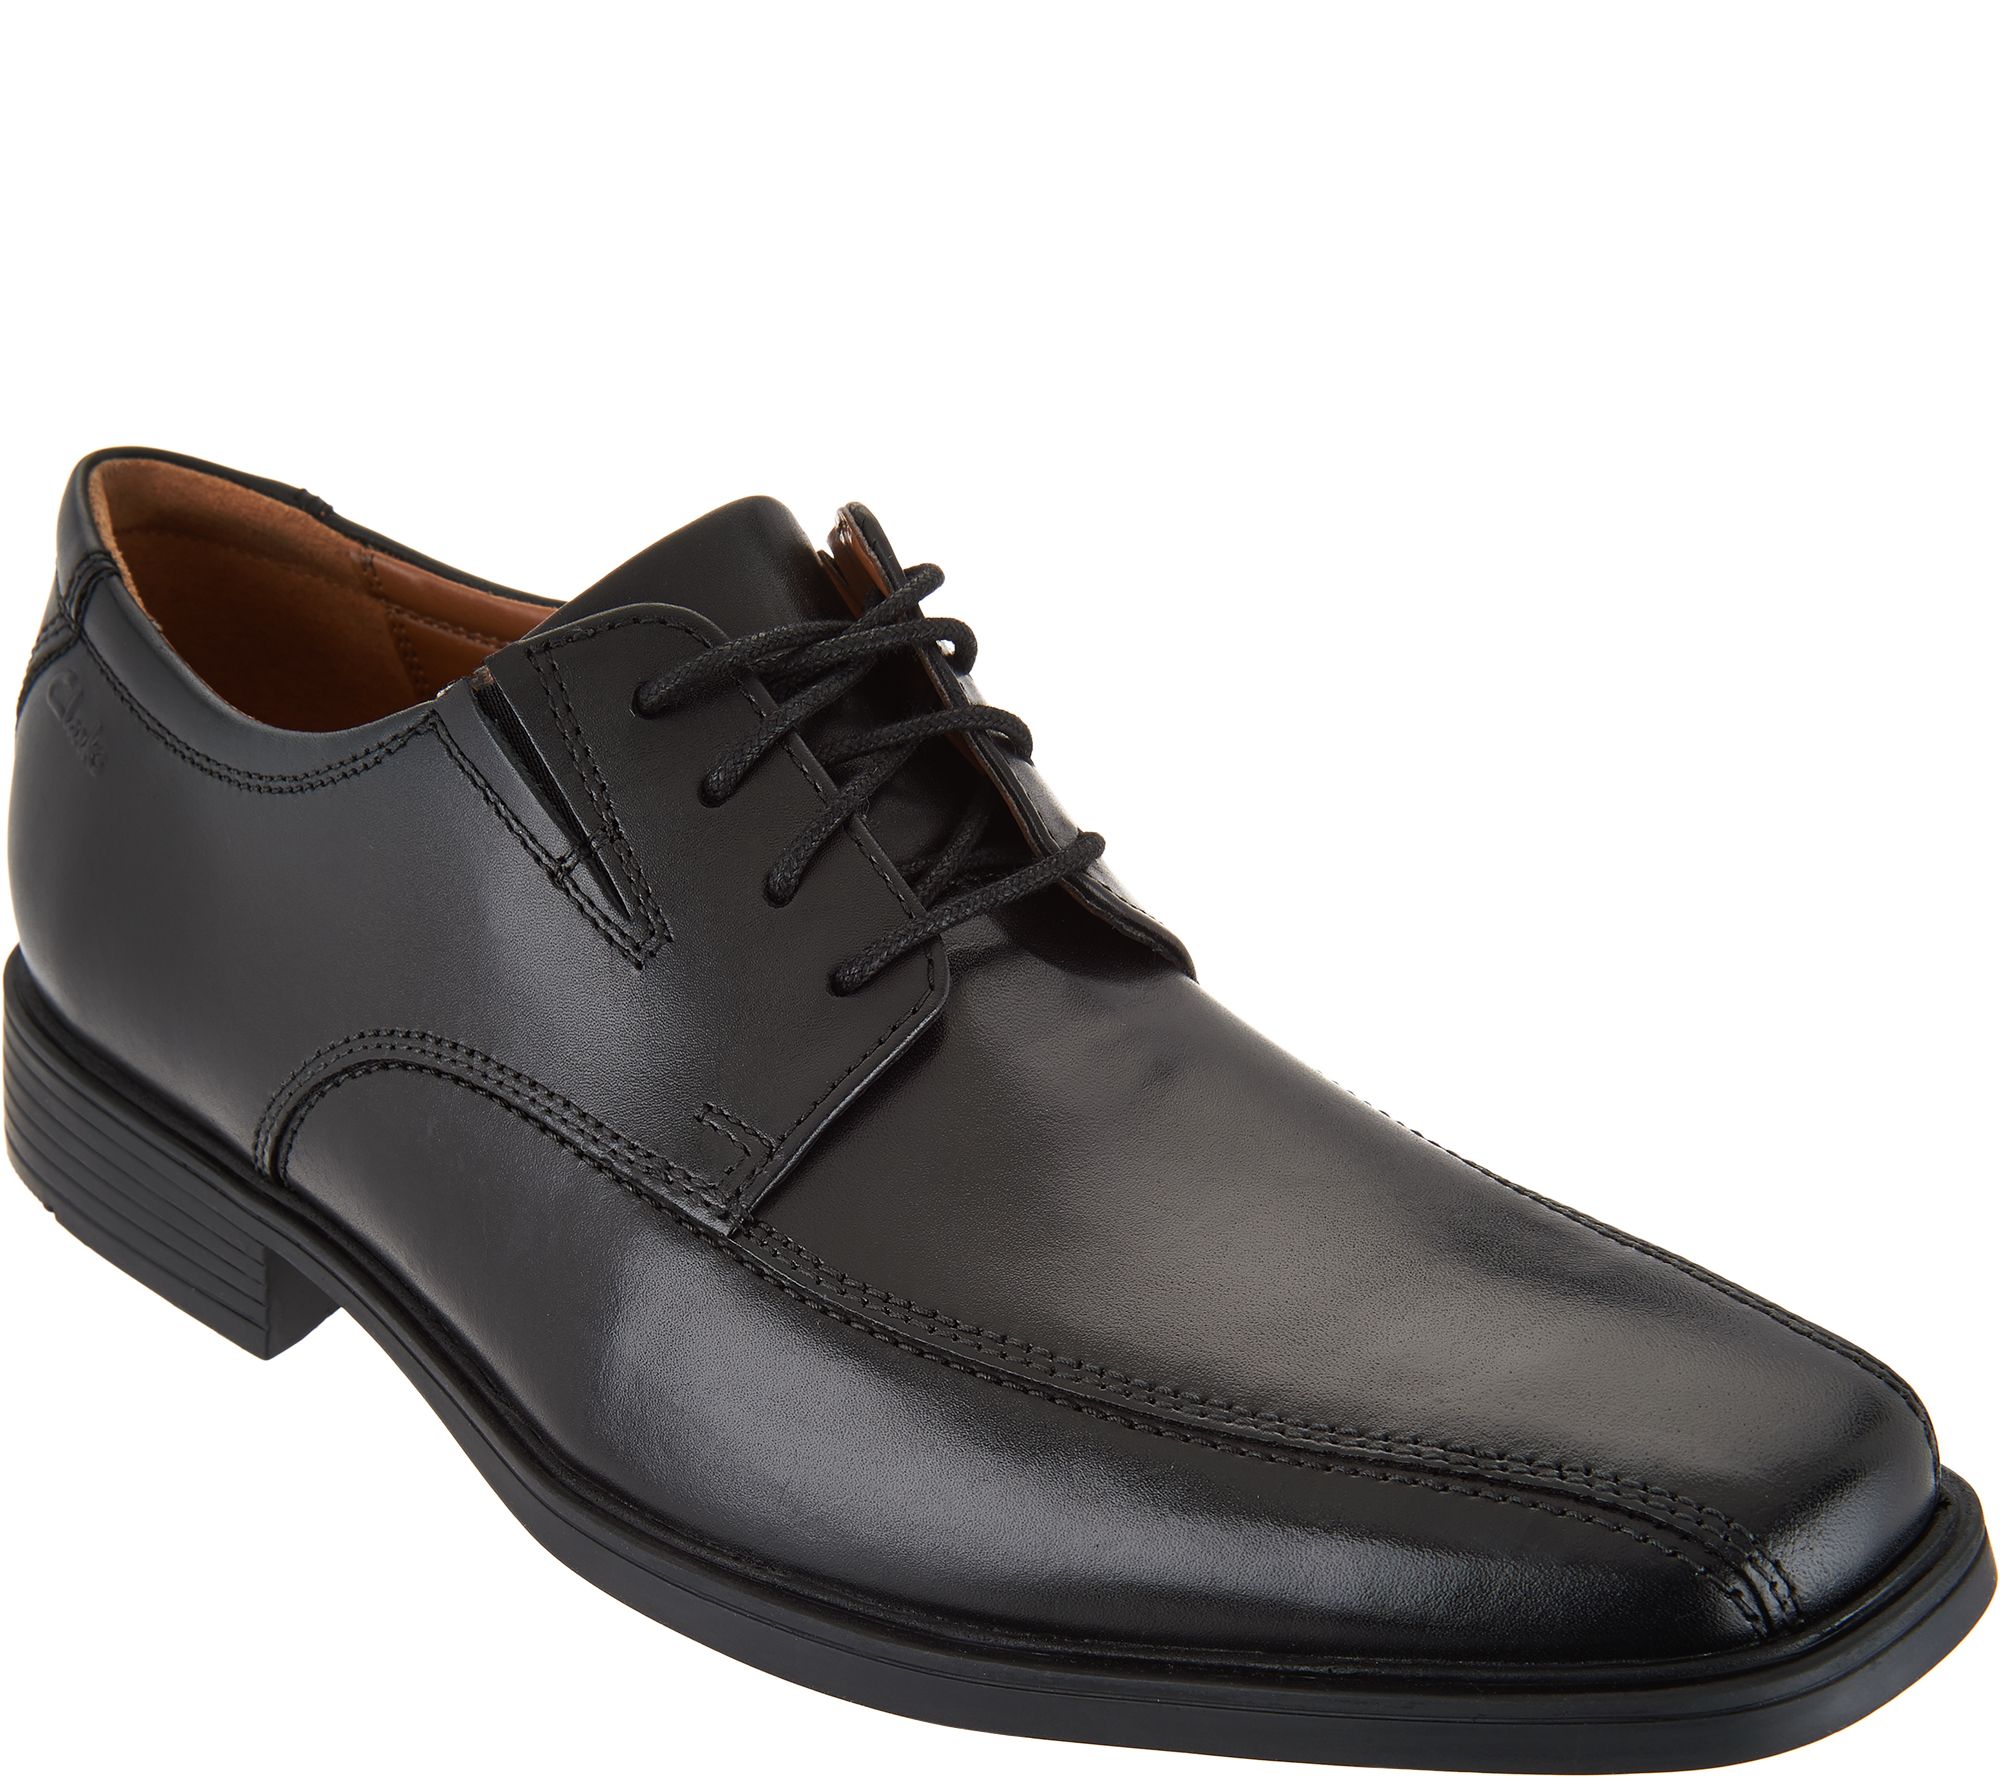 Details about   Mens Clarks Formal Lace Up Shoes Amieson Walk